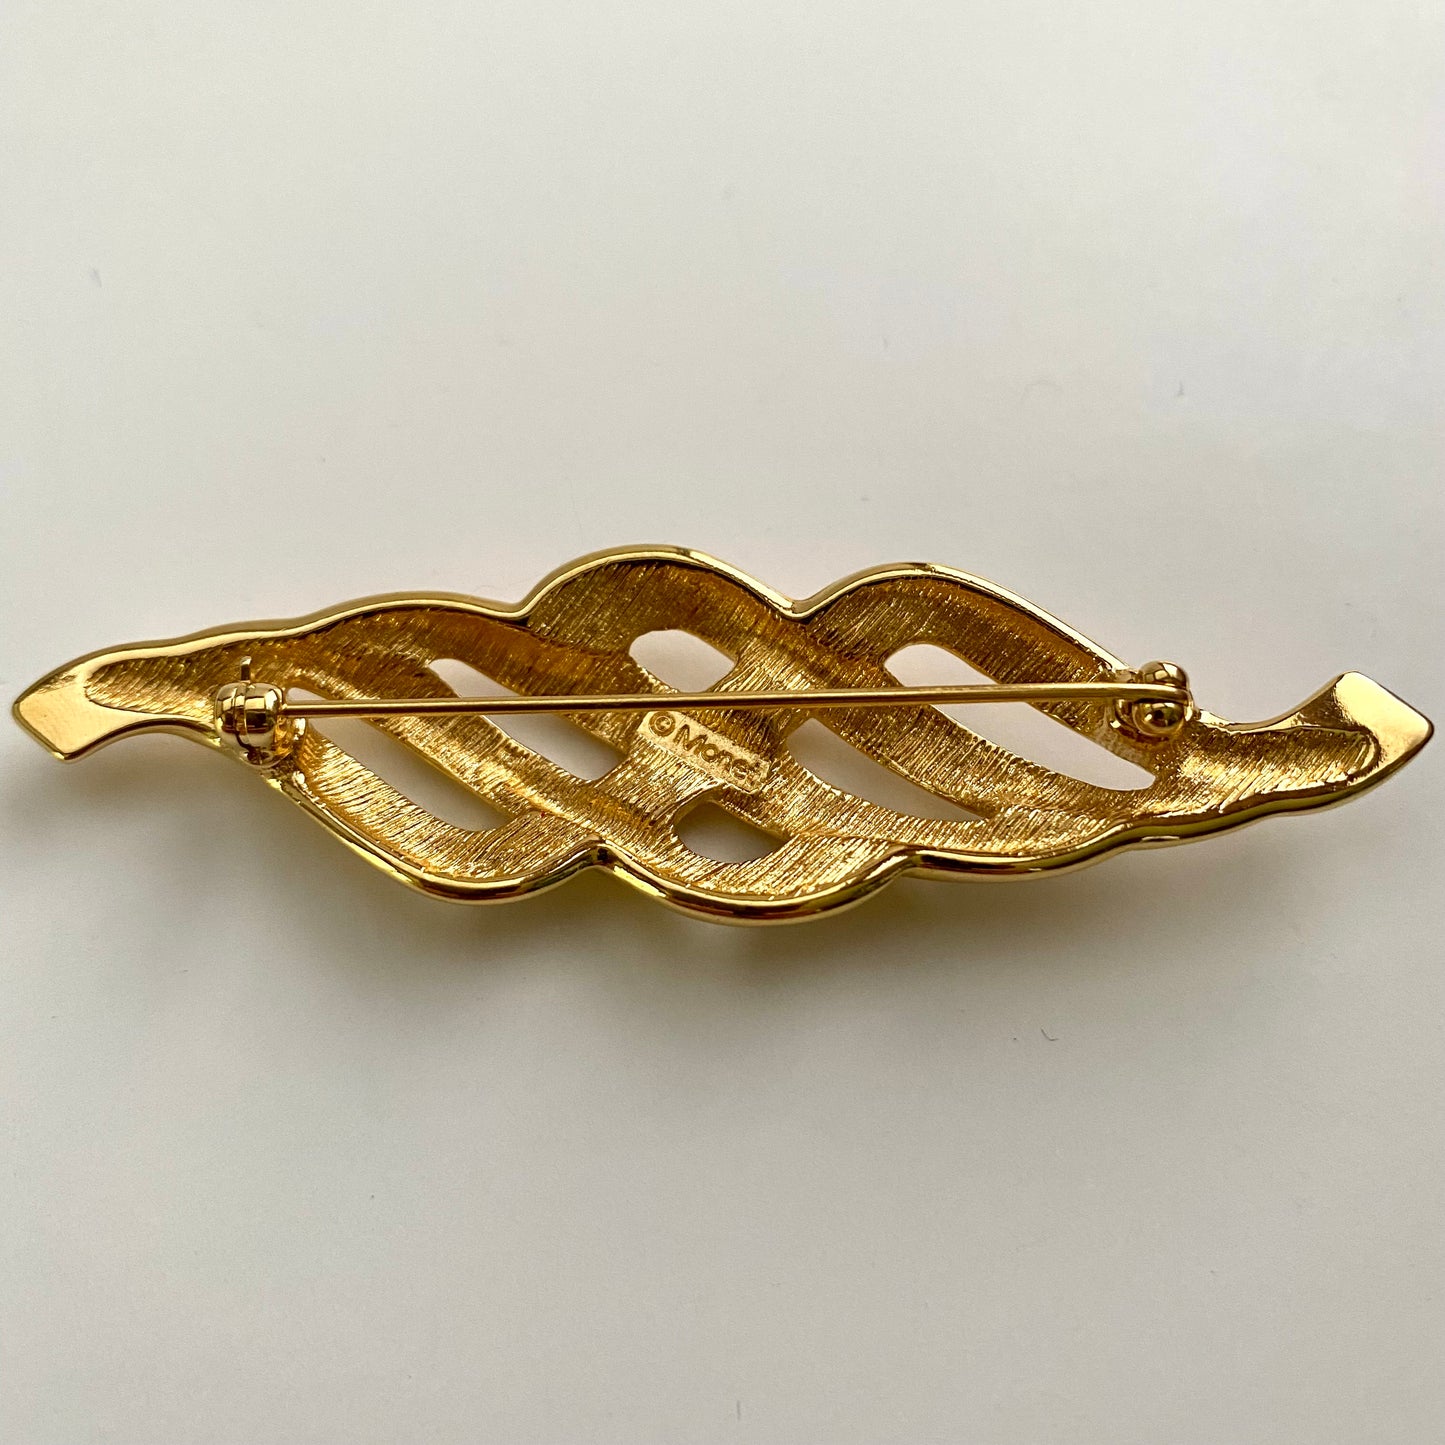 1980s Monet Abstract Brooch